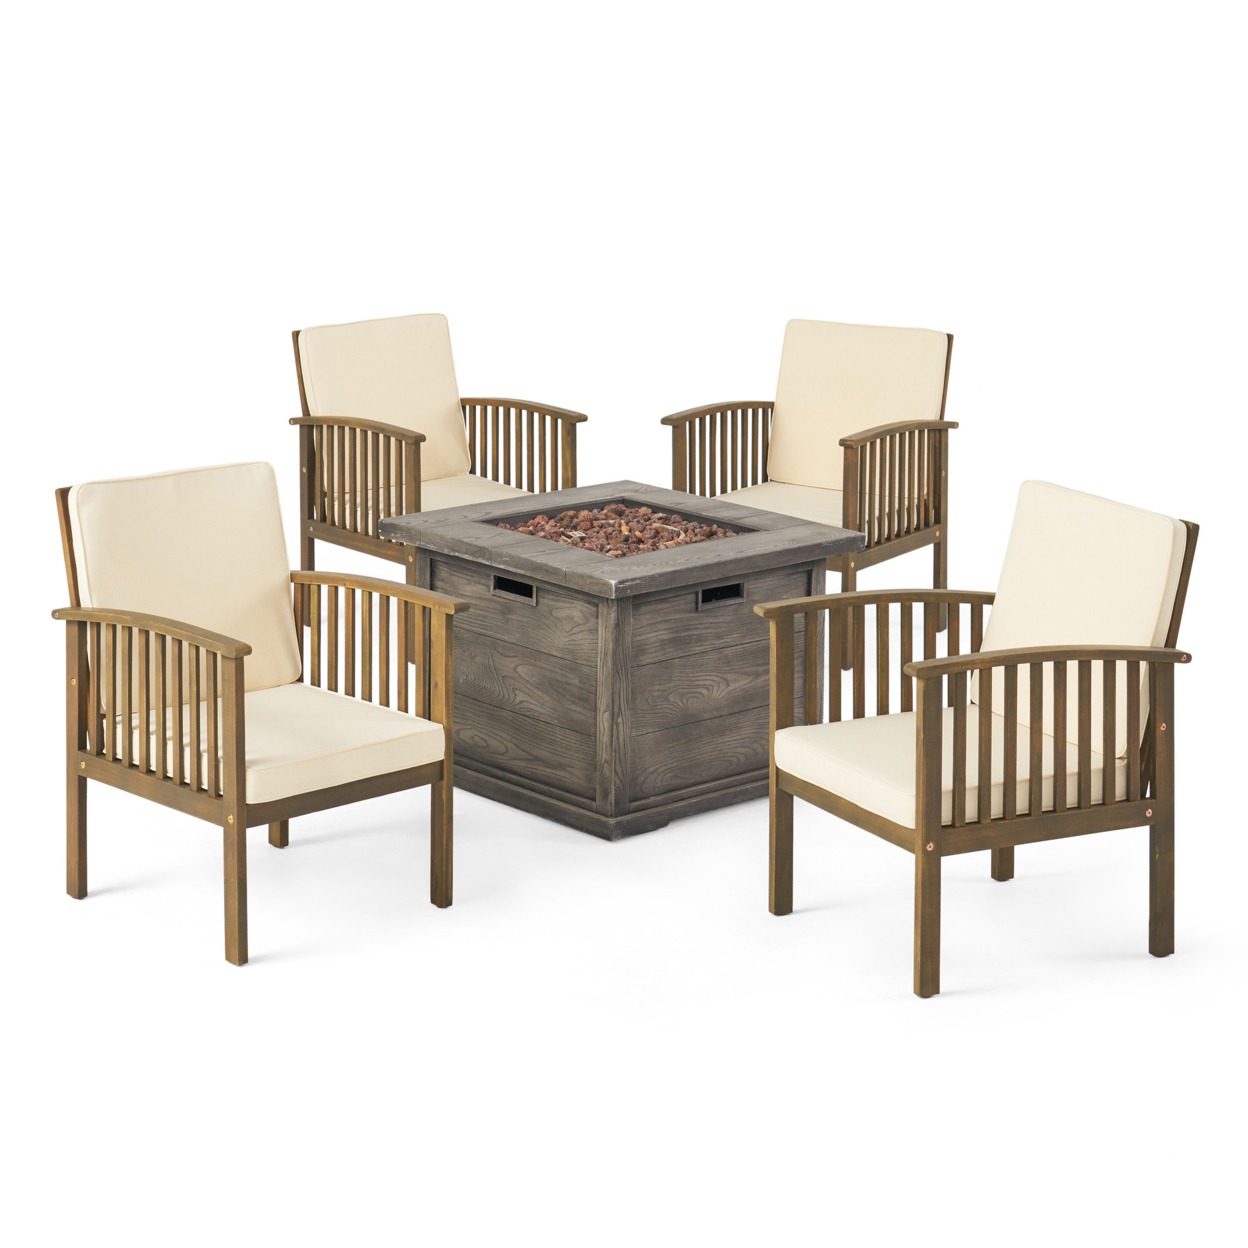 Carol Outdoor 4-Seater Acacia Wood Club Chairs With Firepit, Gray Finish And Cream And Wood Pattern